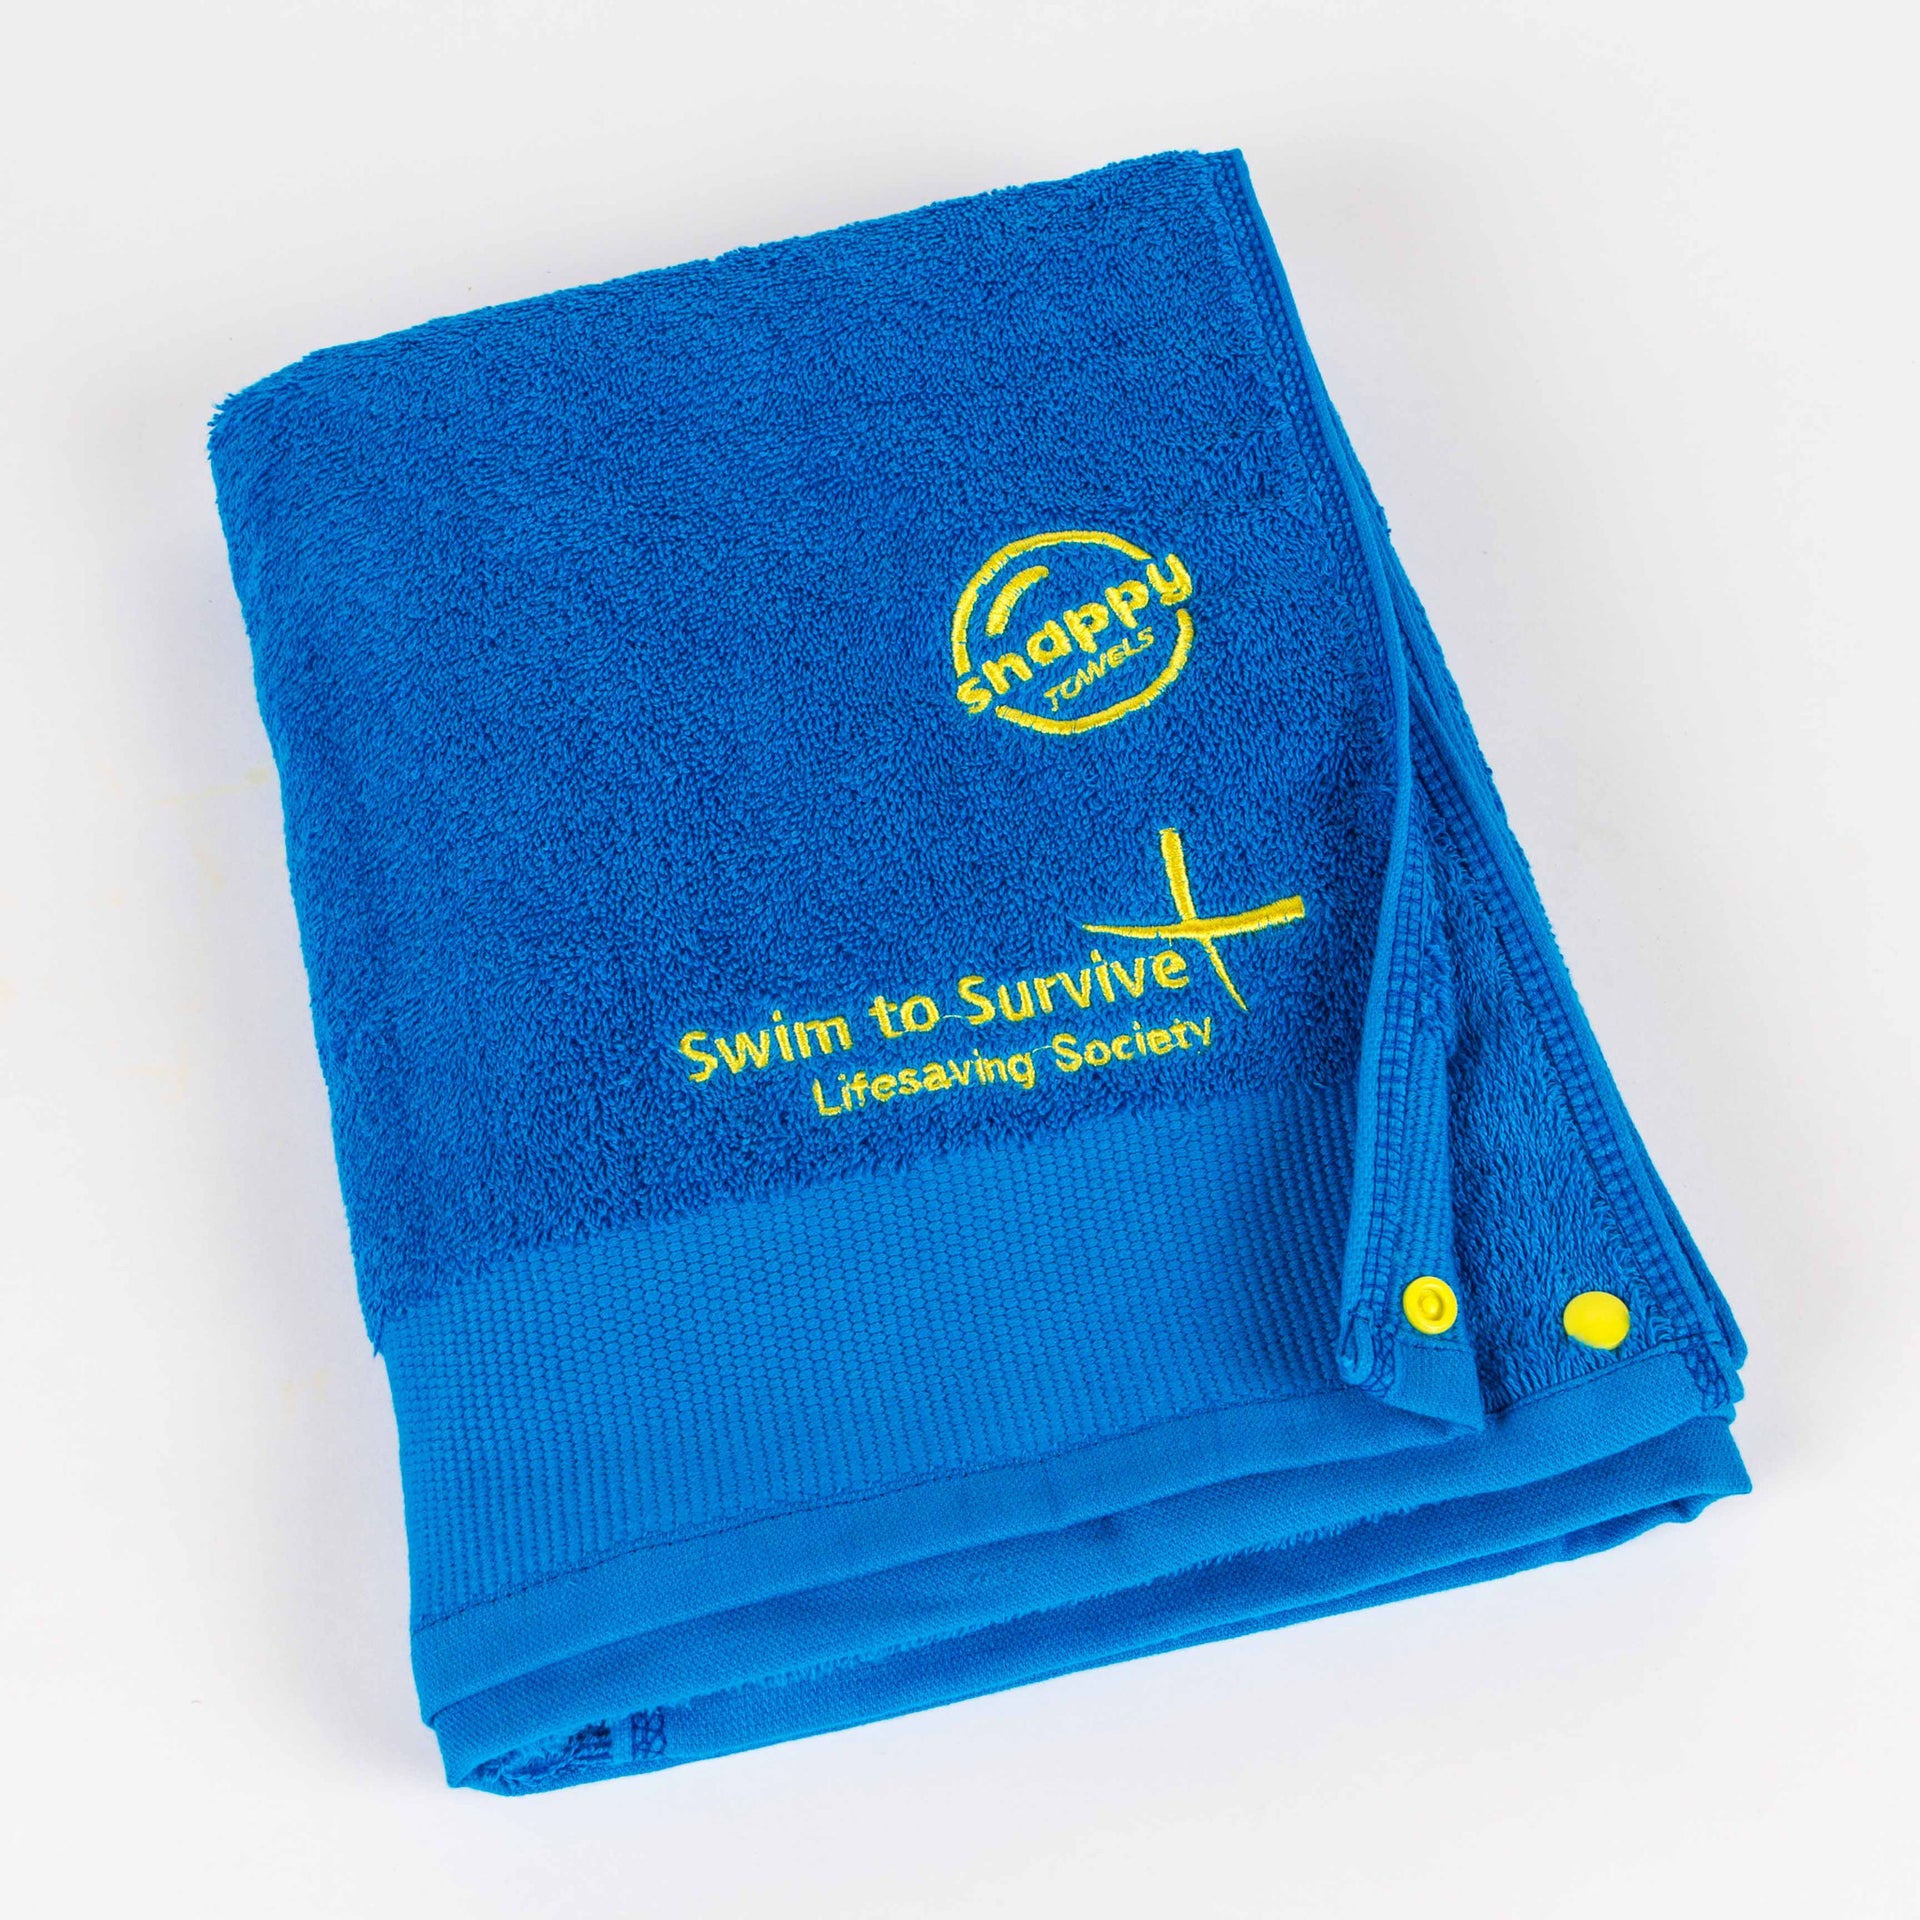 Snappy Towels Inc Partners with Lifesaving Society in Support of Water Safety Program